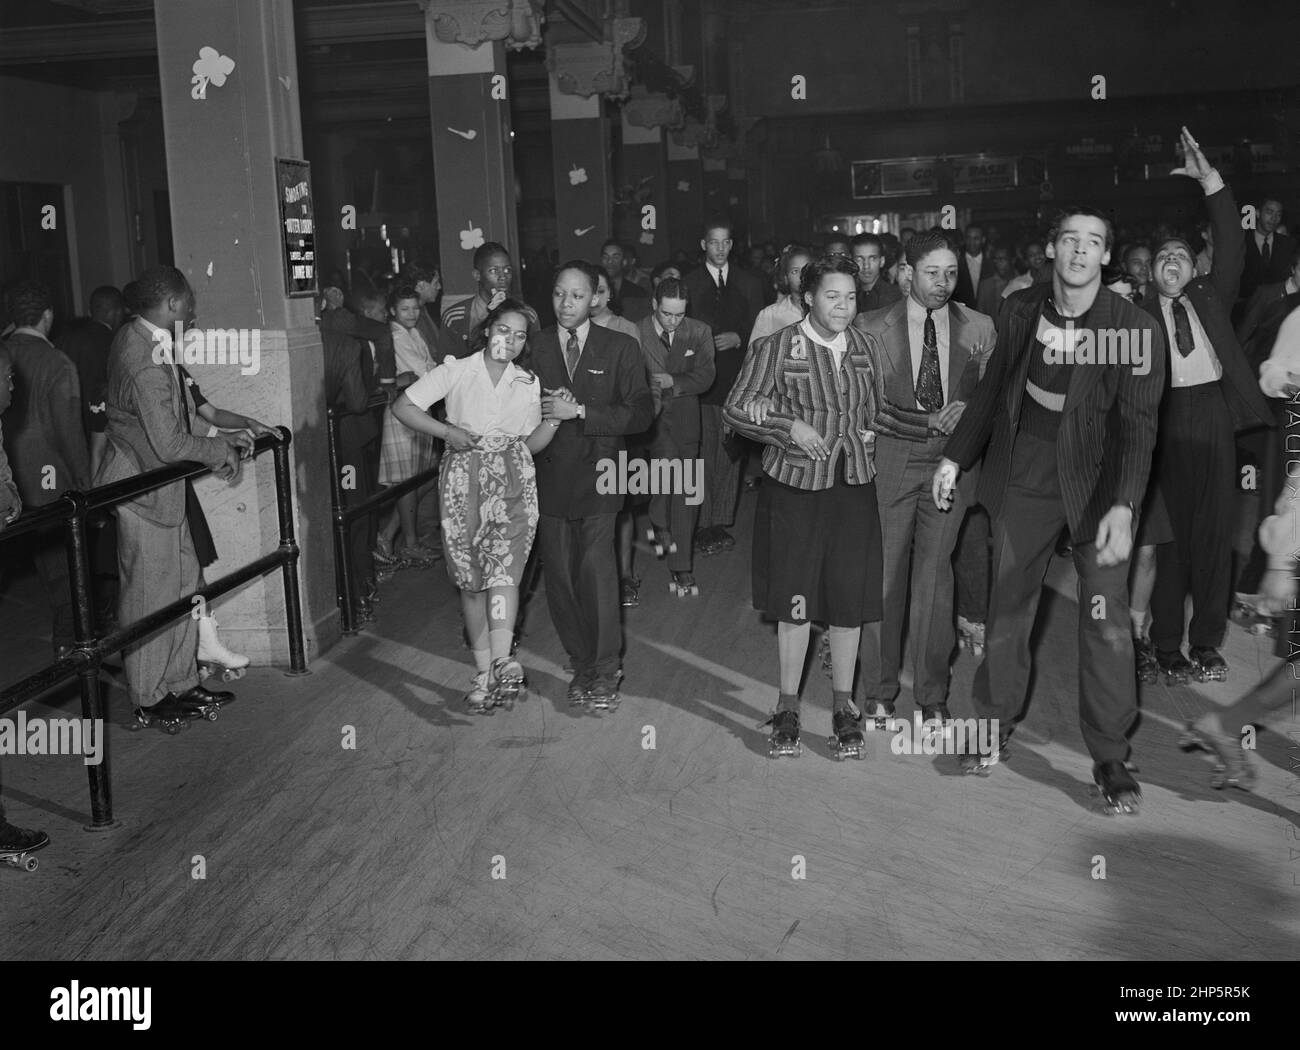 People Roller Skating, Savoy Ballroom, Chicago, Illinois, USA, Russell Lee, U.S. Office of war Information/U.S. Farm Security Administration, April 1941 Stockfoto